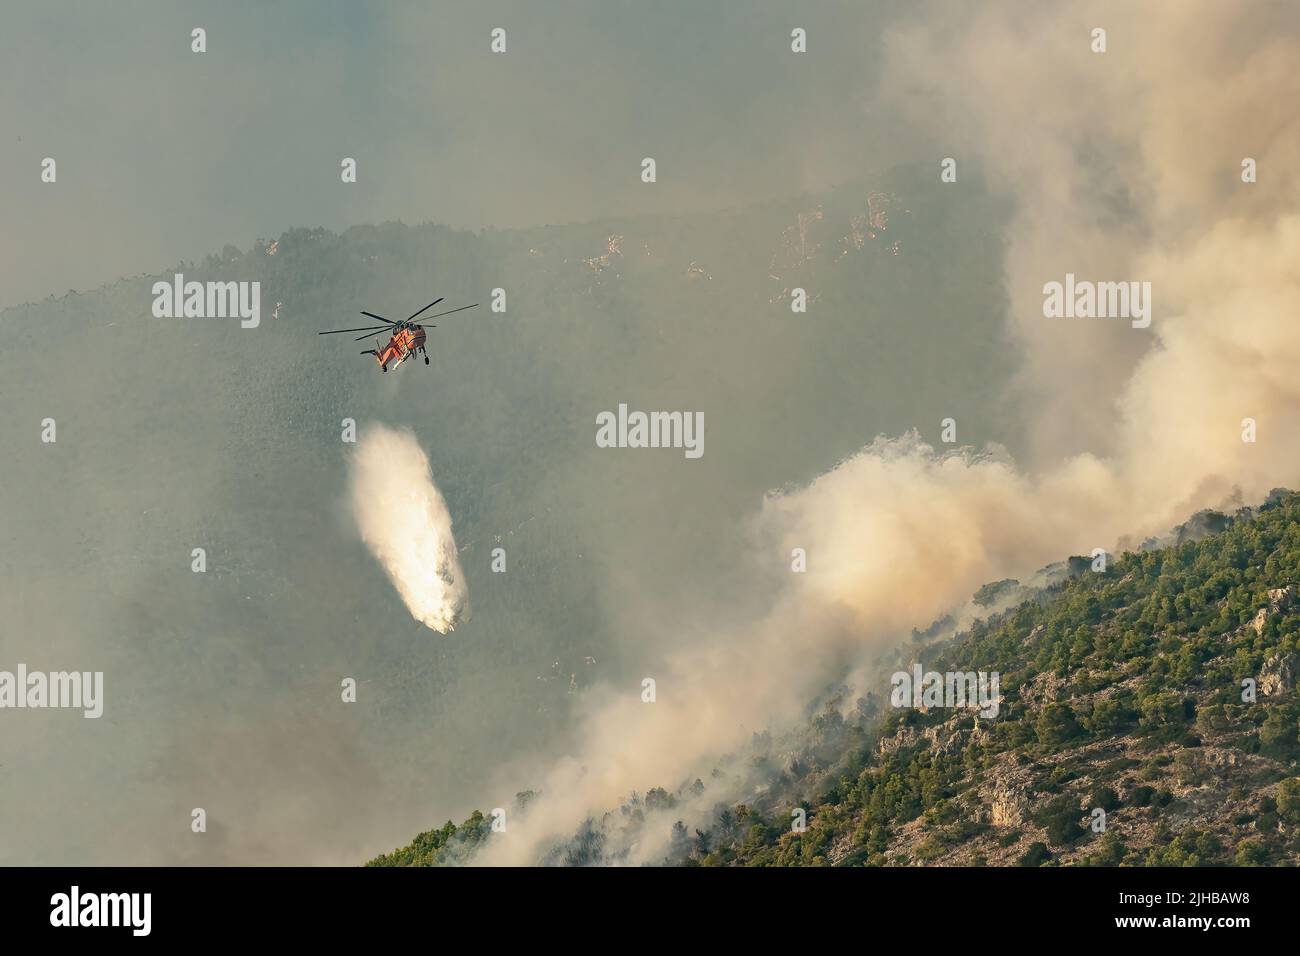 Loutraki, Greece 14 September 2019. Fire helicopter spraying water at Geraneia mountain to eliminate the fire. Stock Photo